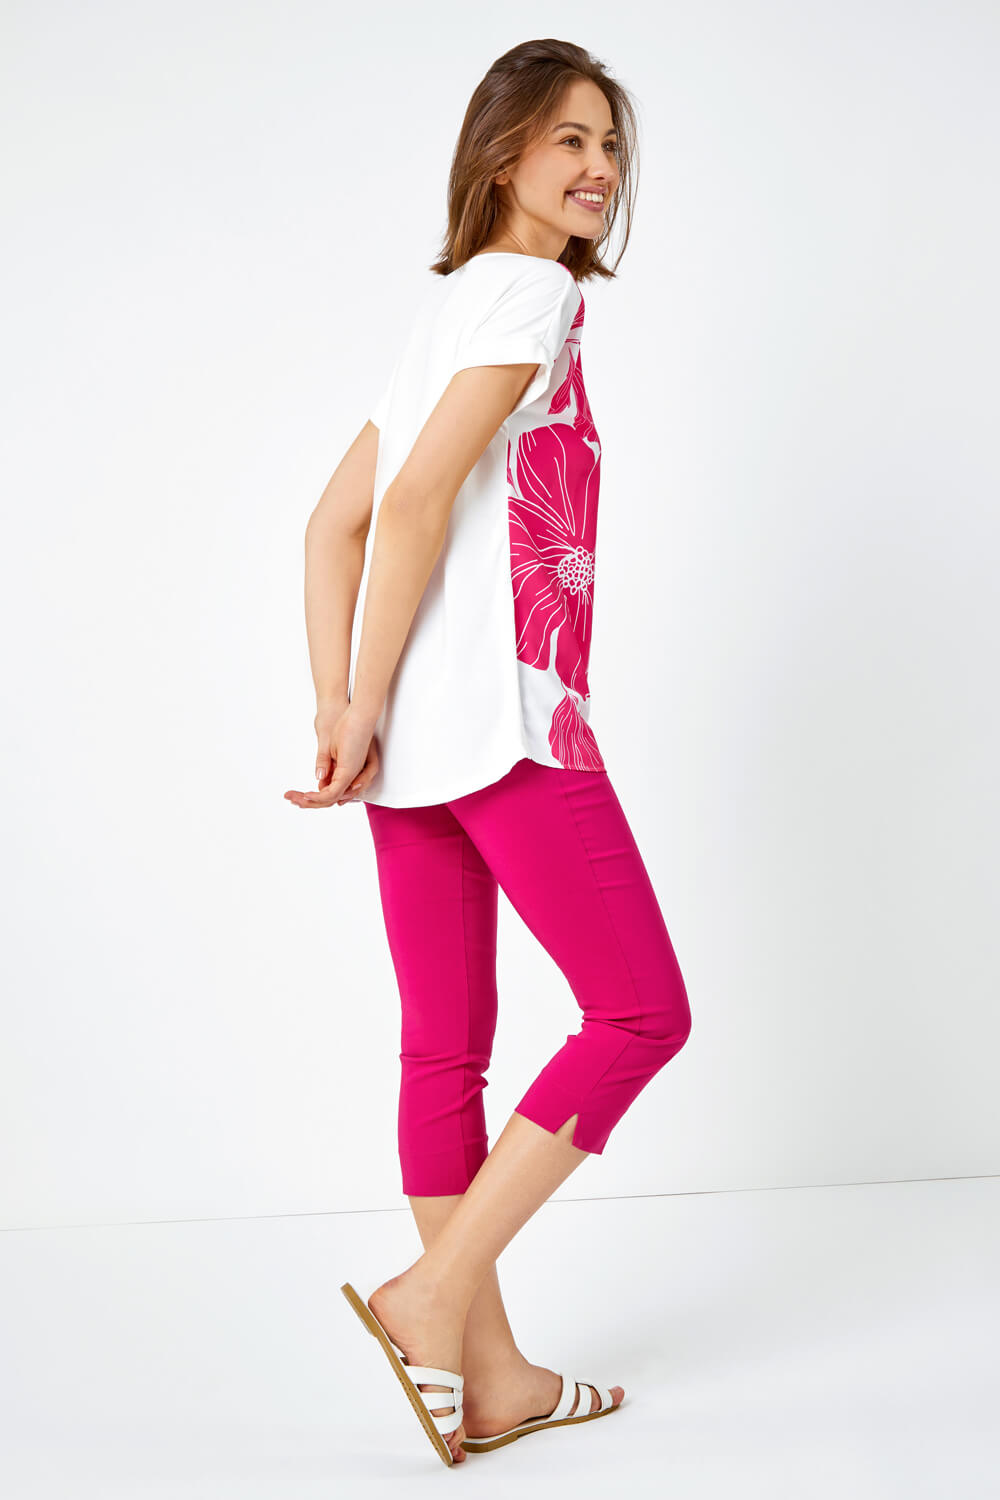 PINK Floral Print Stretch T-Shirt, Image 3 of 5